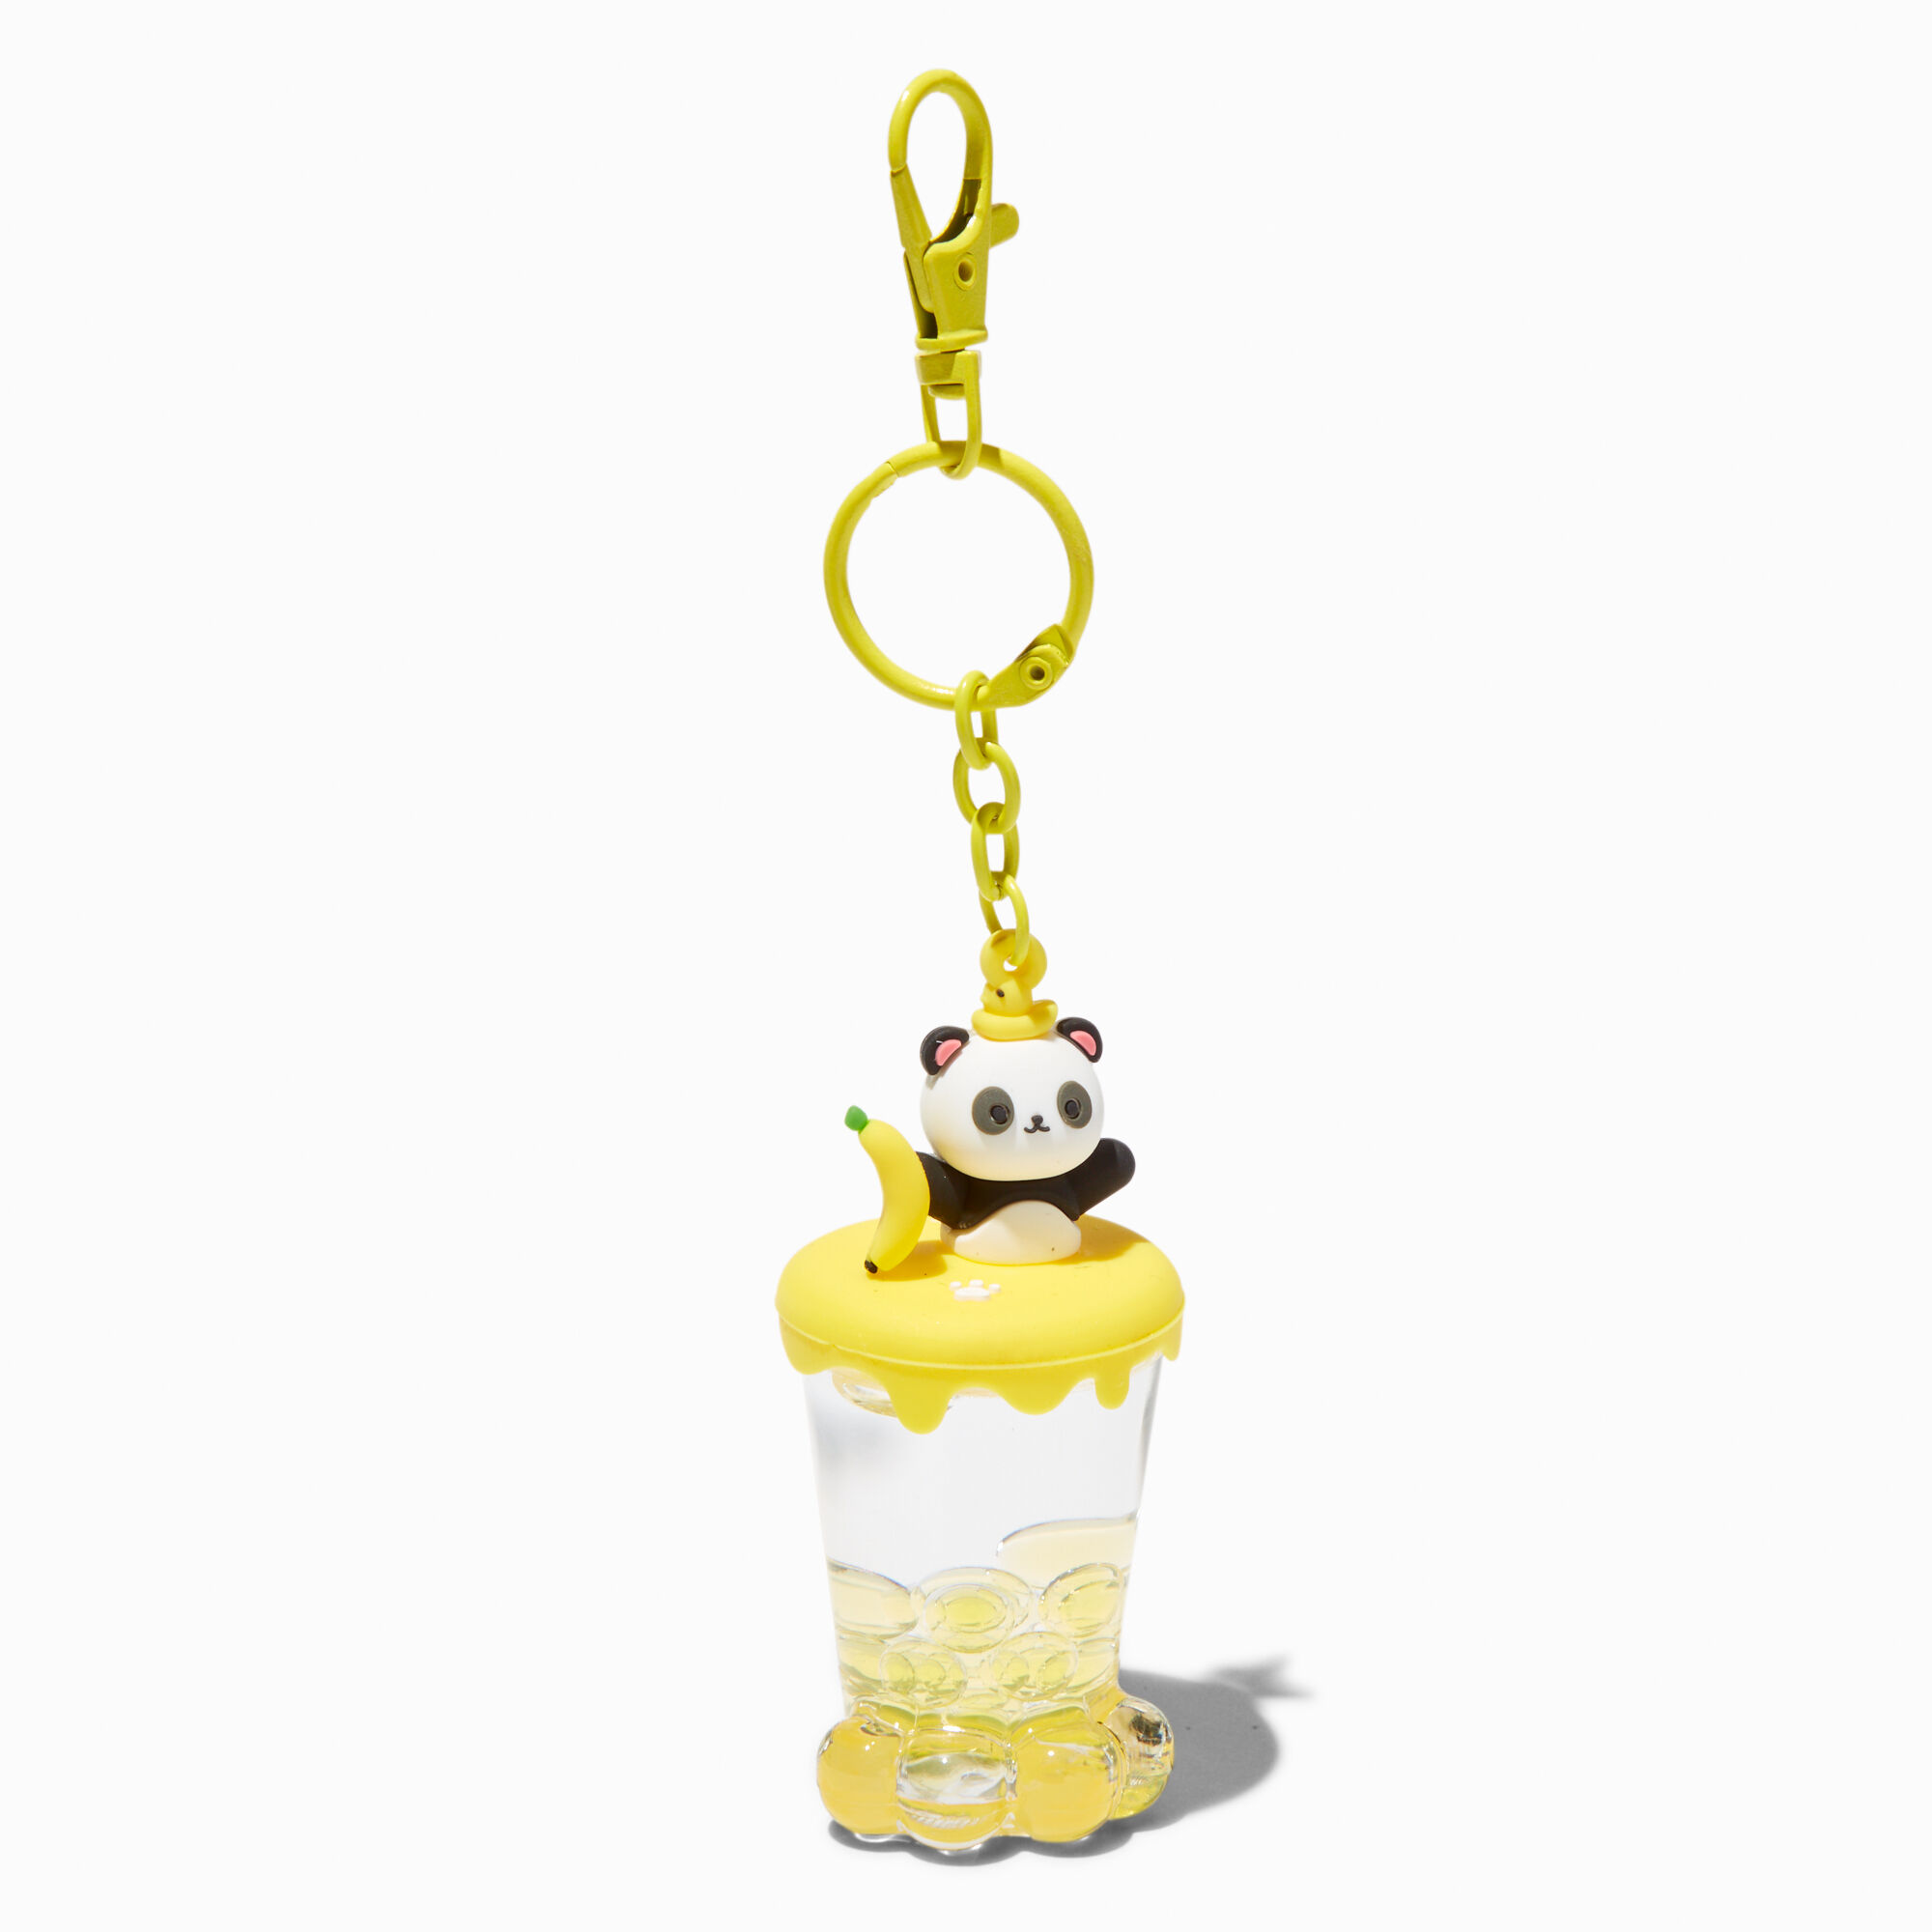 View Claires Panda Banana WaterFilled Glitter Keyring information